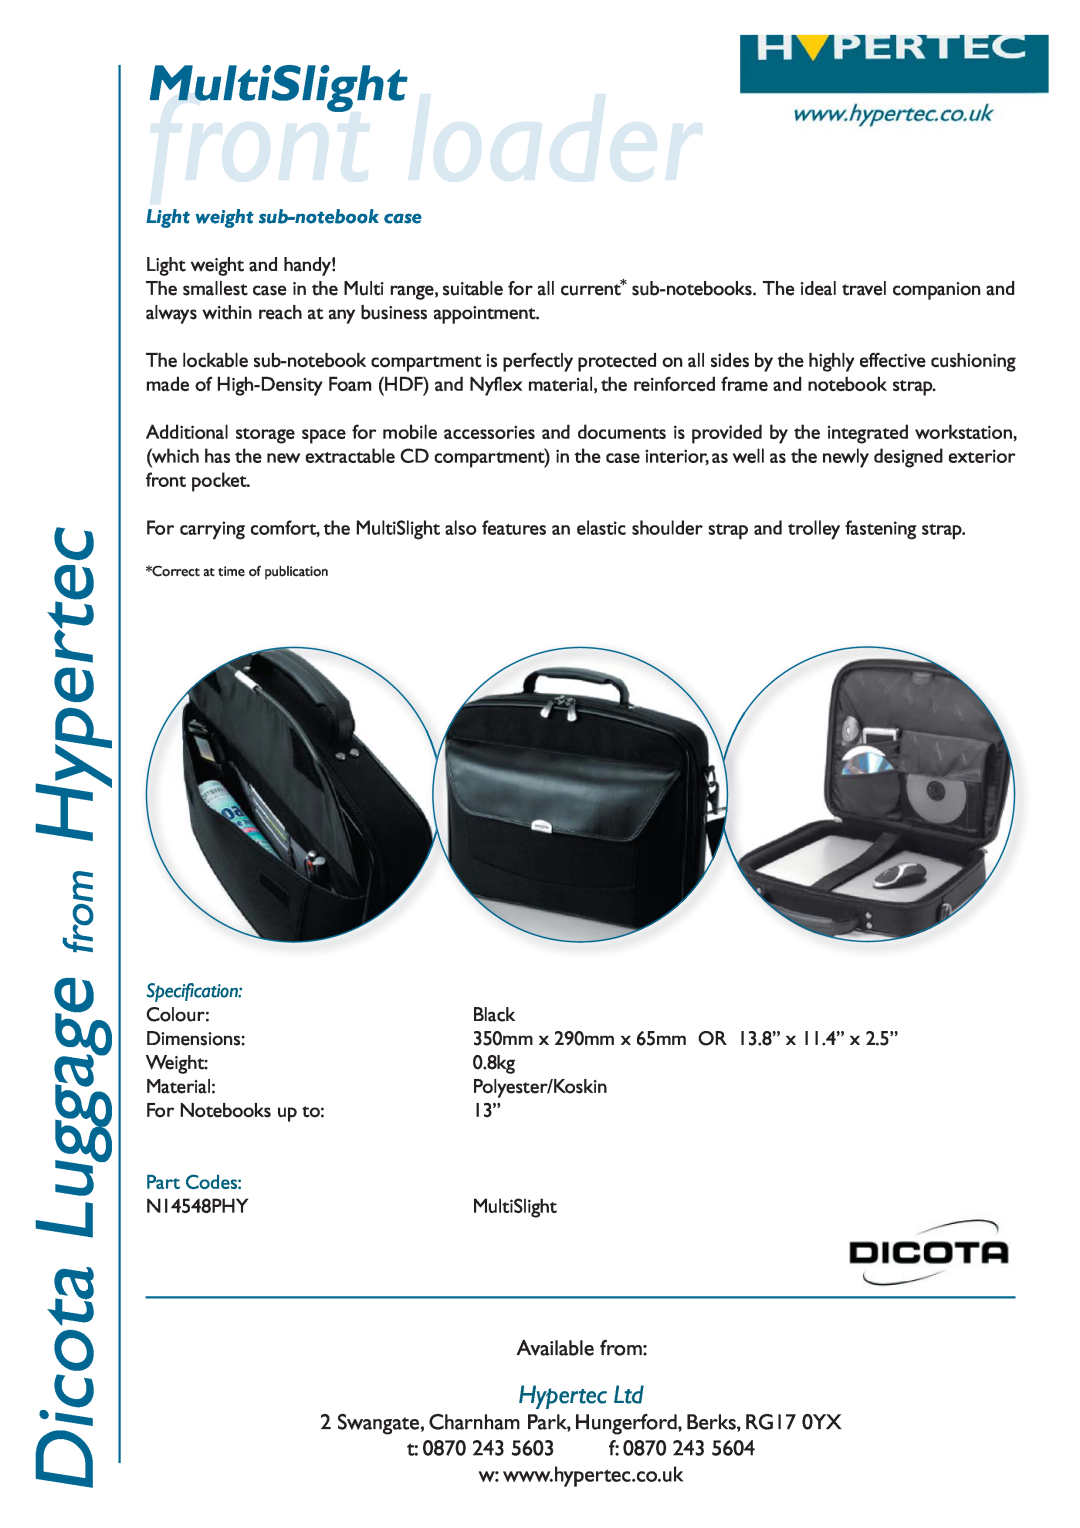 Hypertec N14548PHY dimensions front loader, Dicota Luggage from Hypertec, MultiSlight, Available from, t 0870 243 